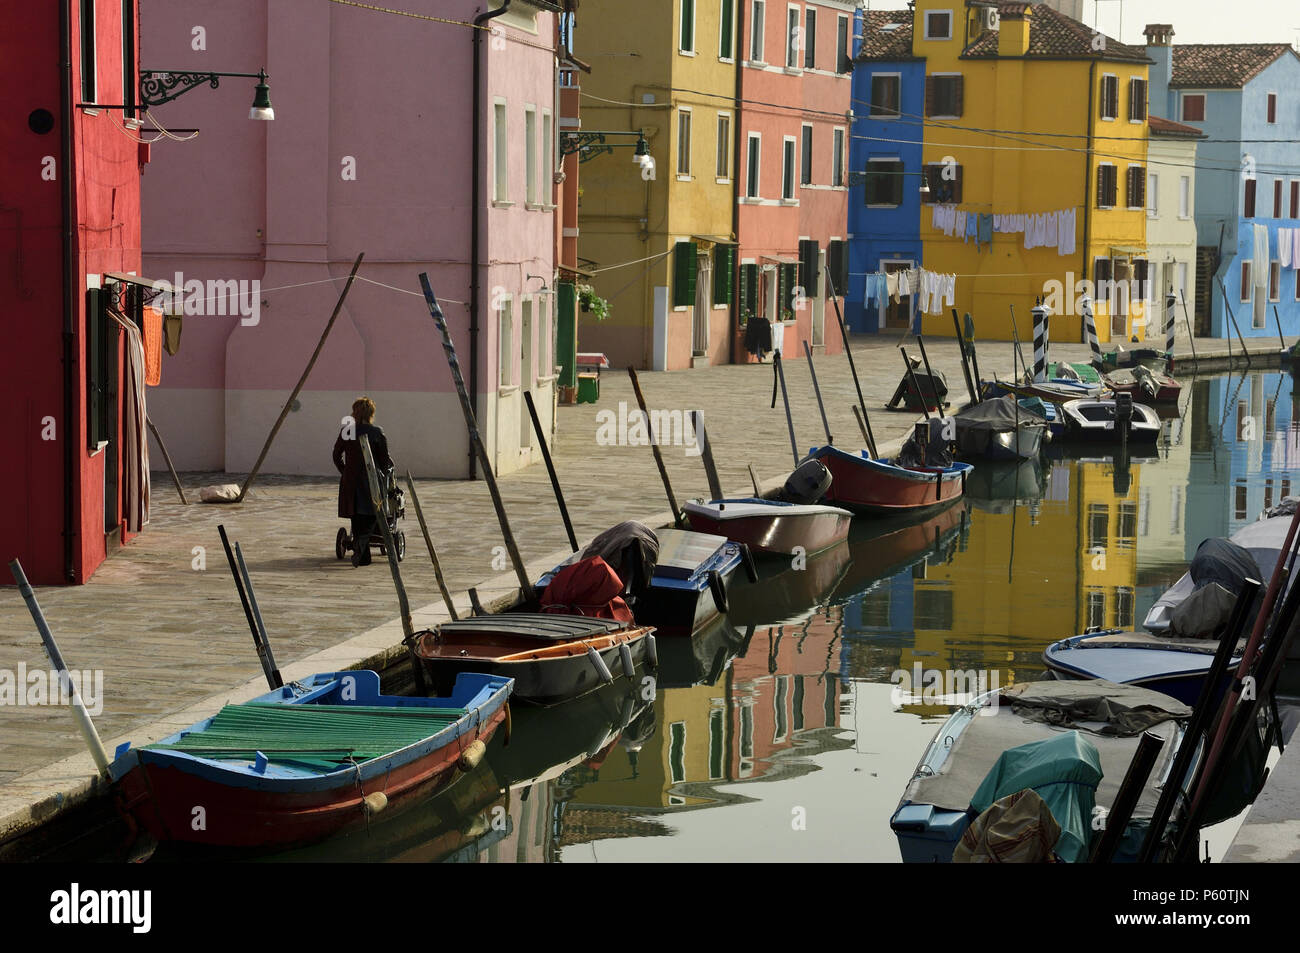 Colorful urban scene along one of the many canals in the Commune di Venezia and Centro Storico areas of Venice, Italy, on October 25, 2005. Stock Photo